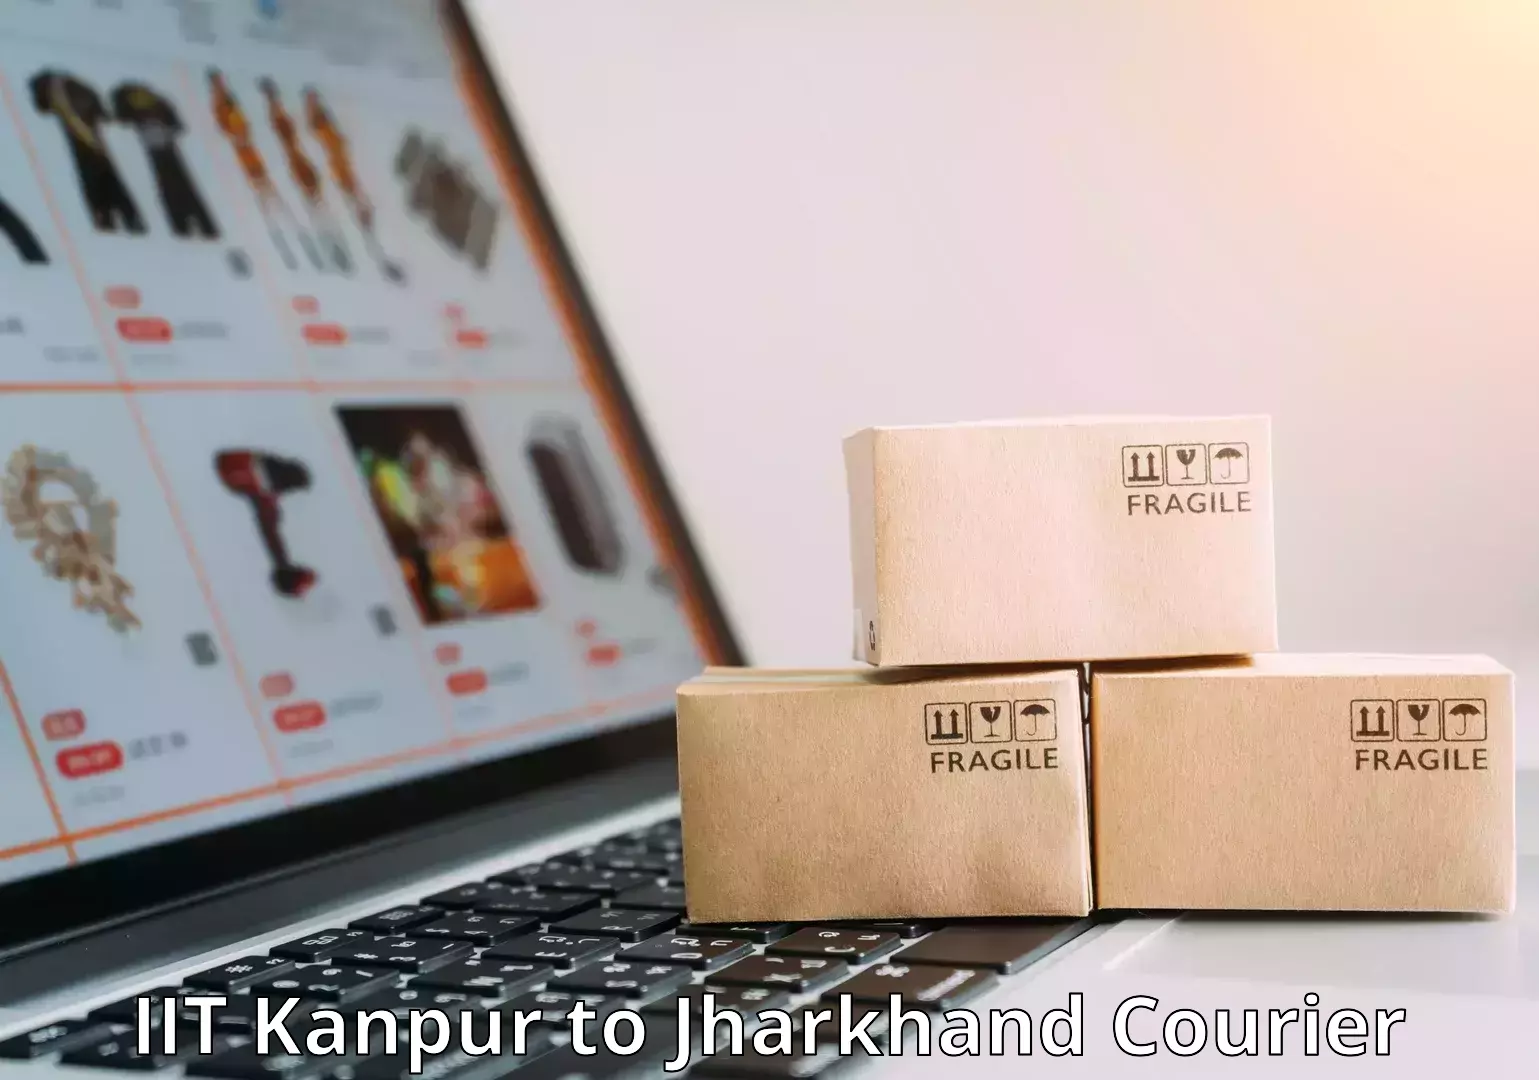 Luggage shipment tracking IIT Kanpur to Jharkhand